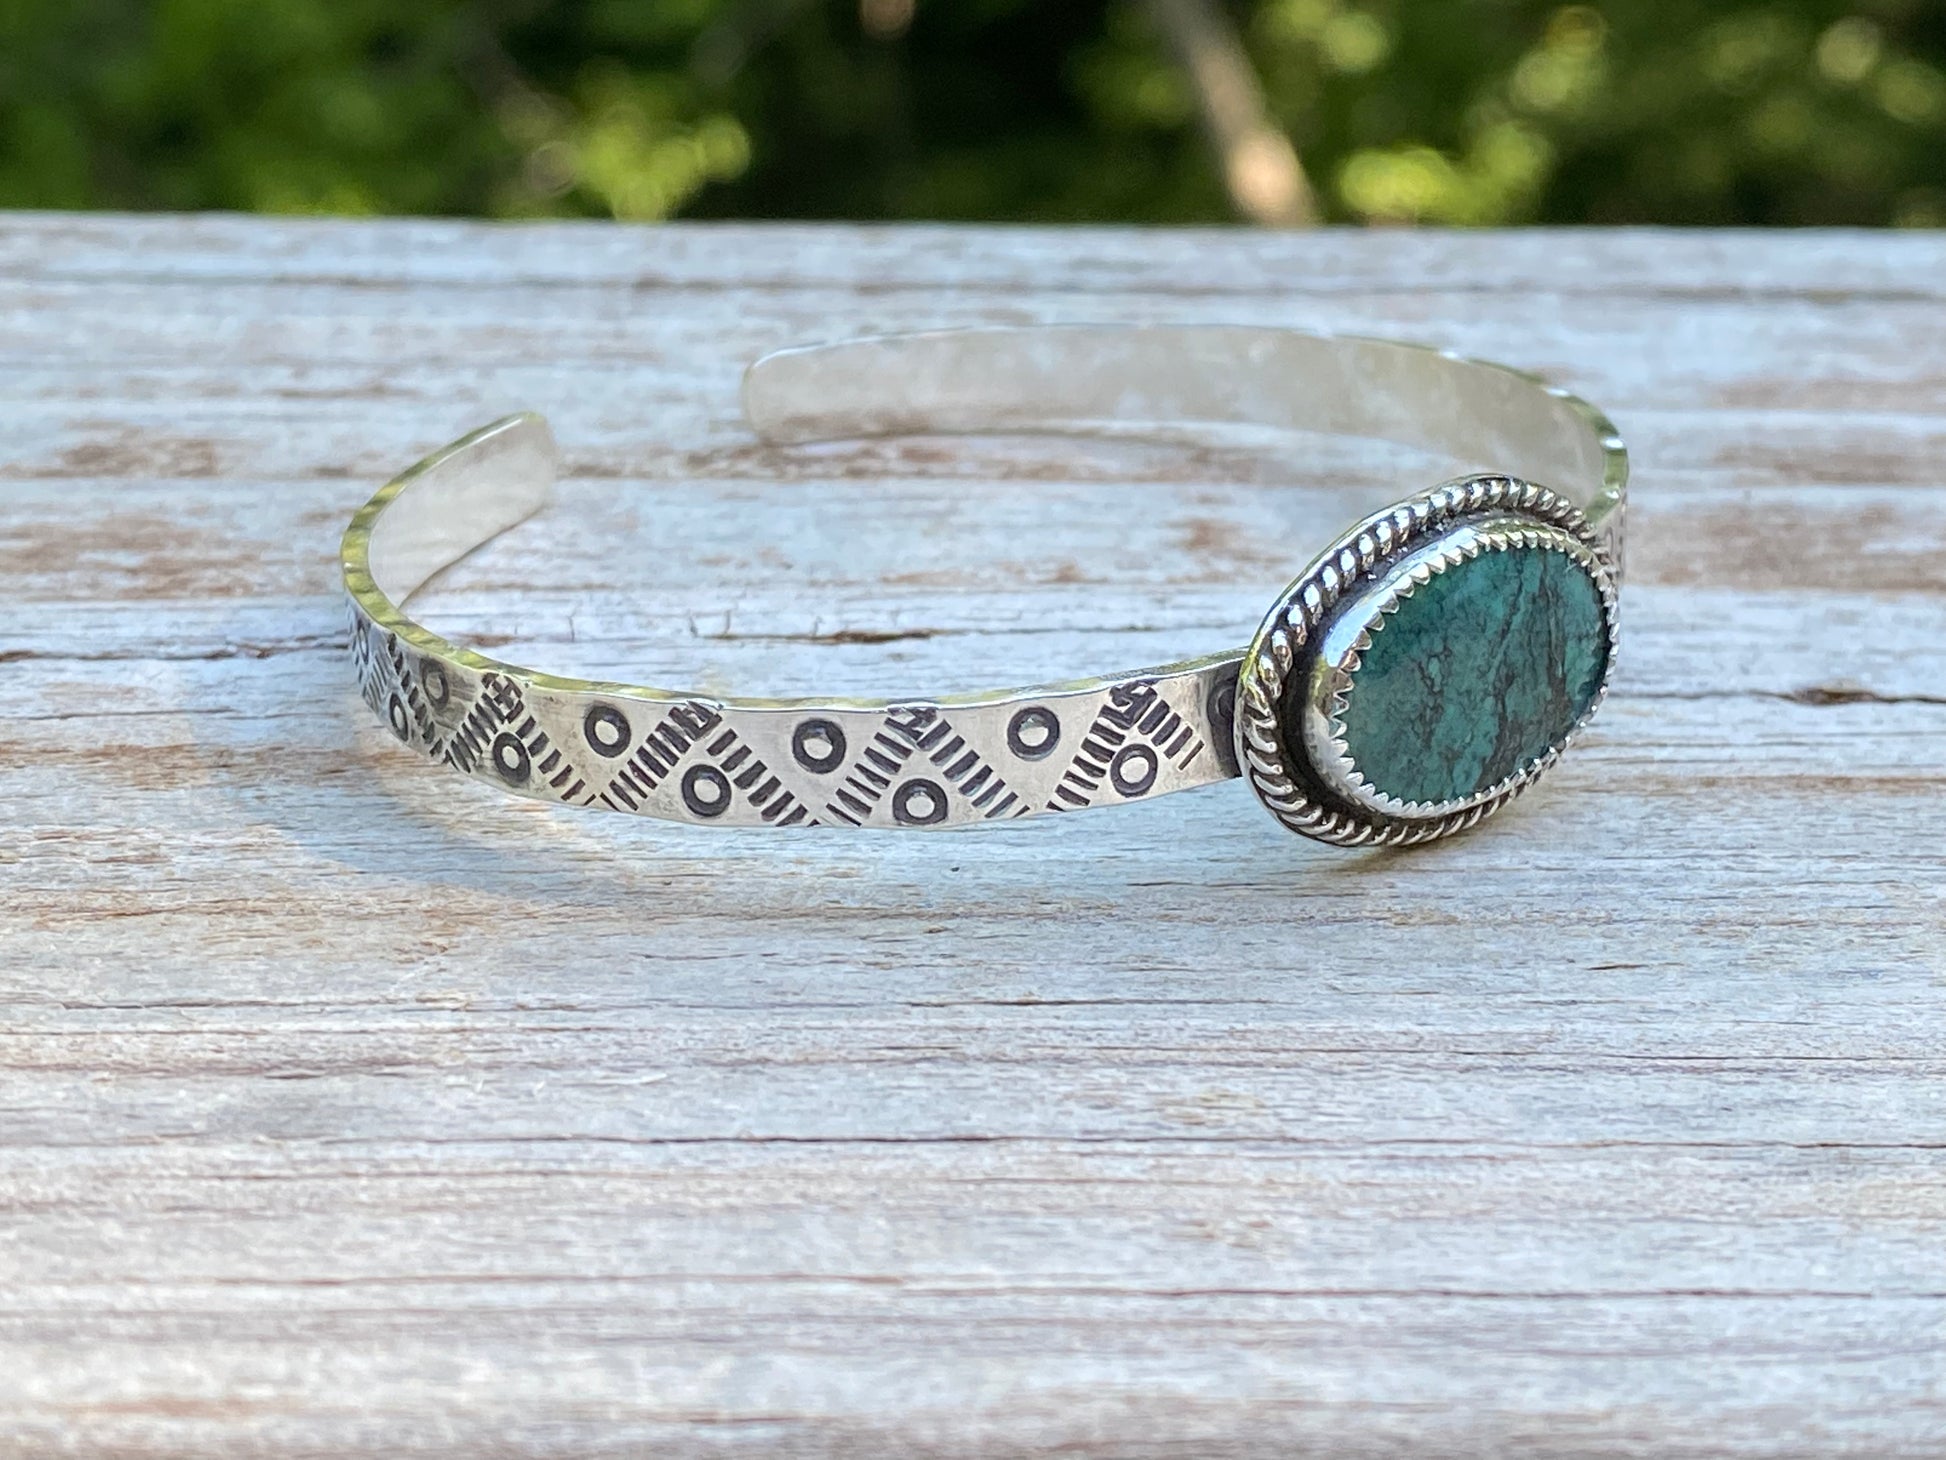 Turquoise bangles - collectionsbytracy.com